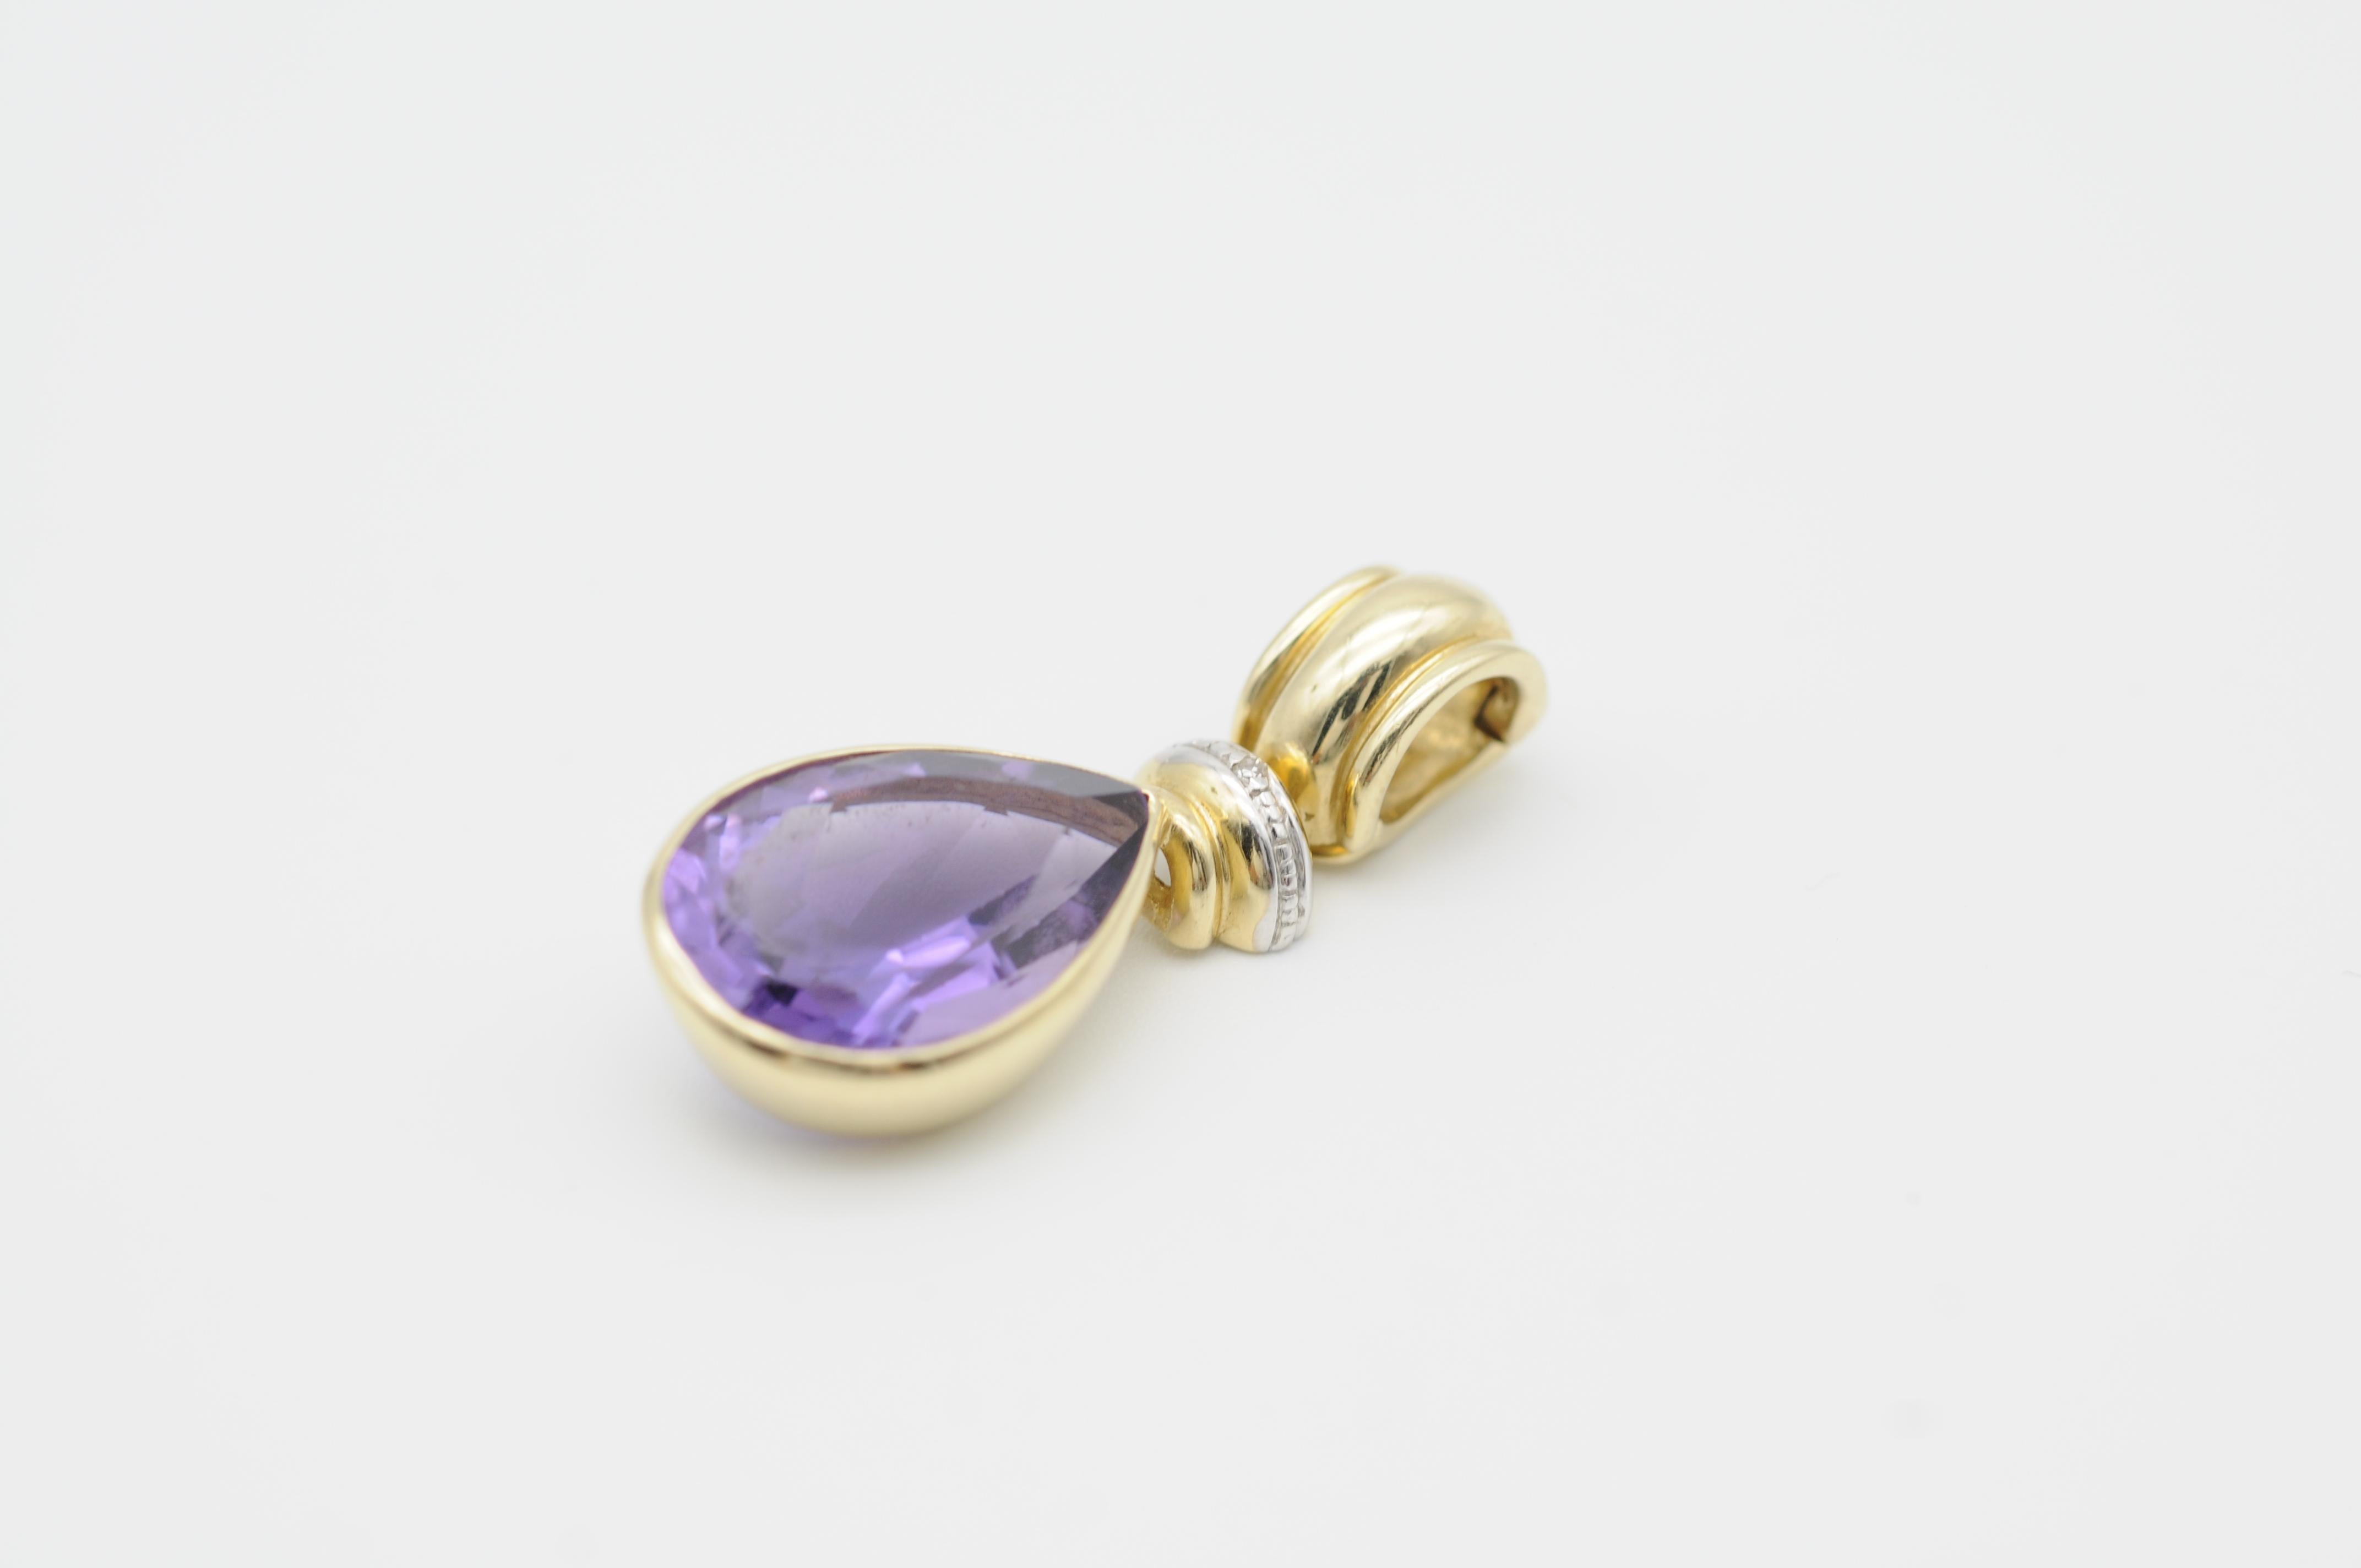 This pendant is an exquisite piece of jewelry, featuring a stunning teardrop-shaped amethyst that has been masterfully cut into a pedeloque shape, showcasing the natural beauty of the gemstone. The amethyst is set in a classic 14k yellow gold